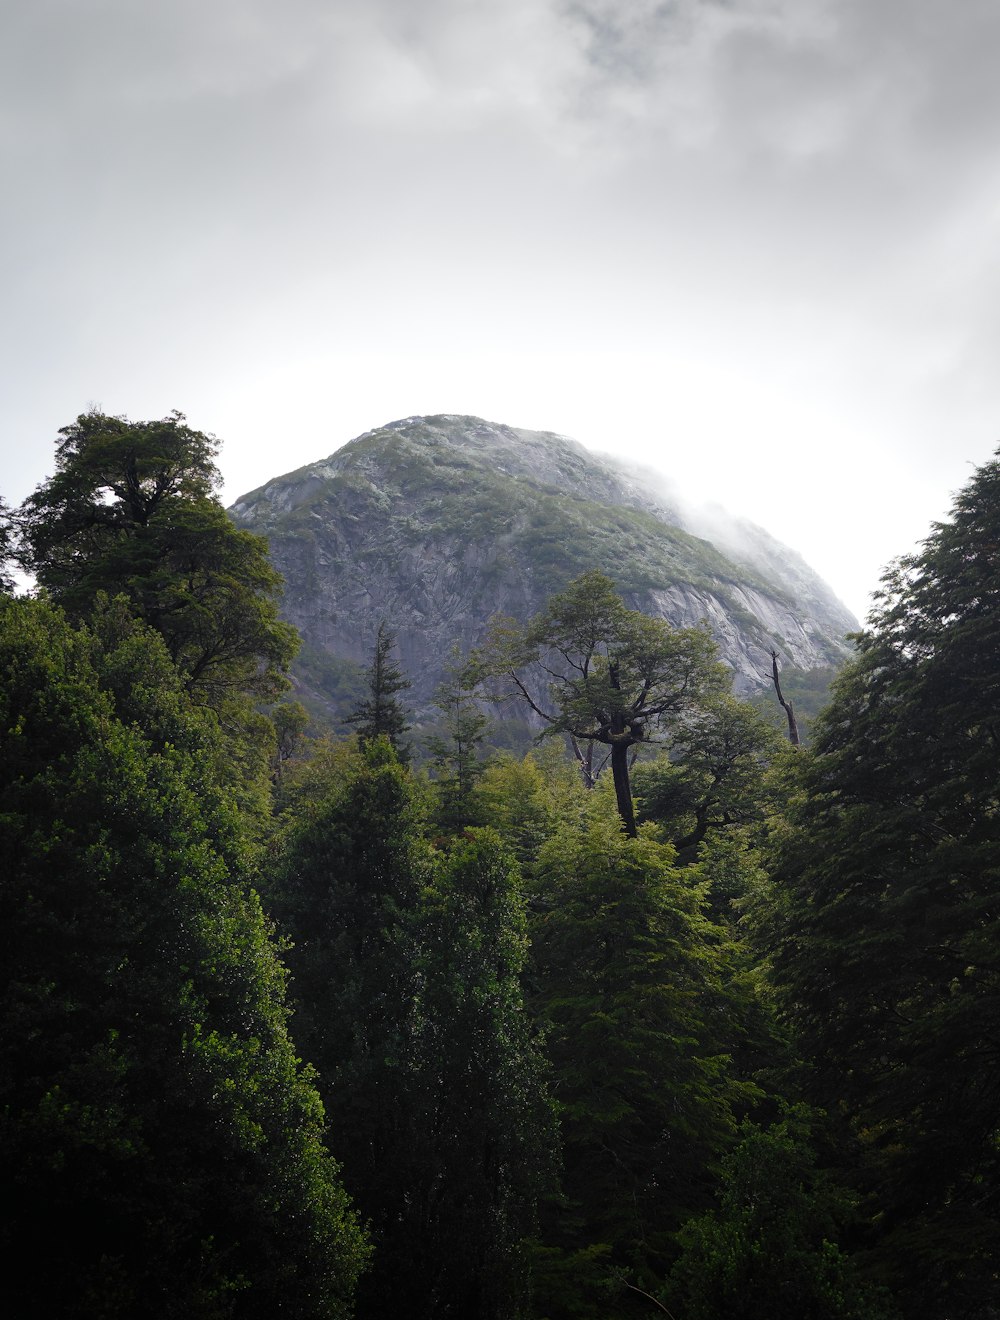 a view of a mountain with trees in the foreground